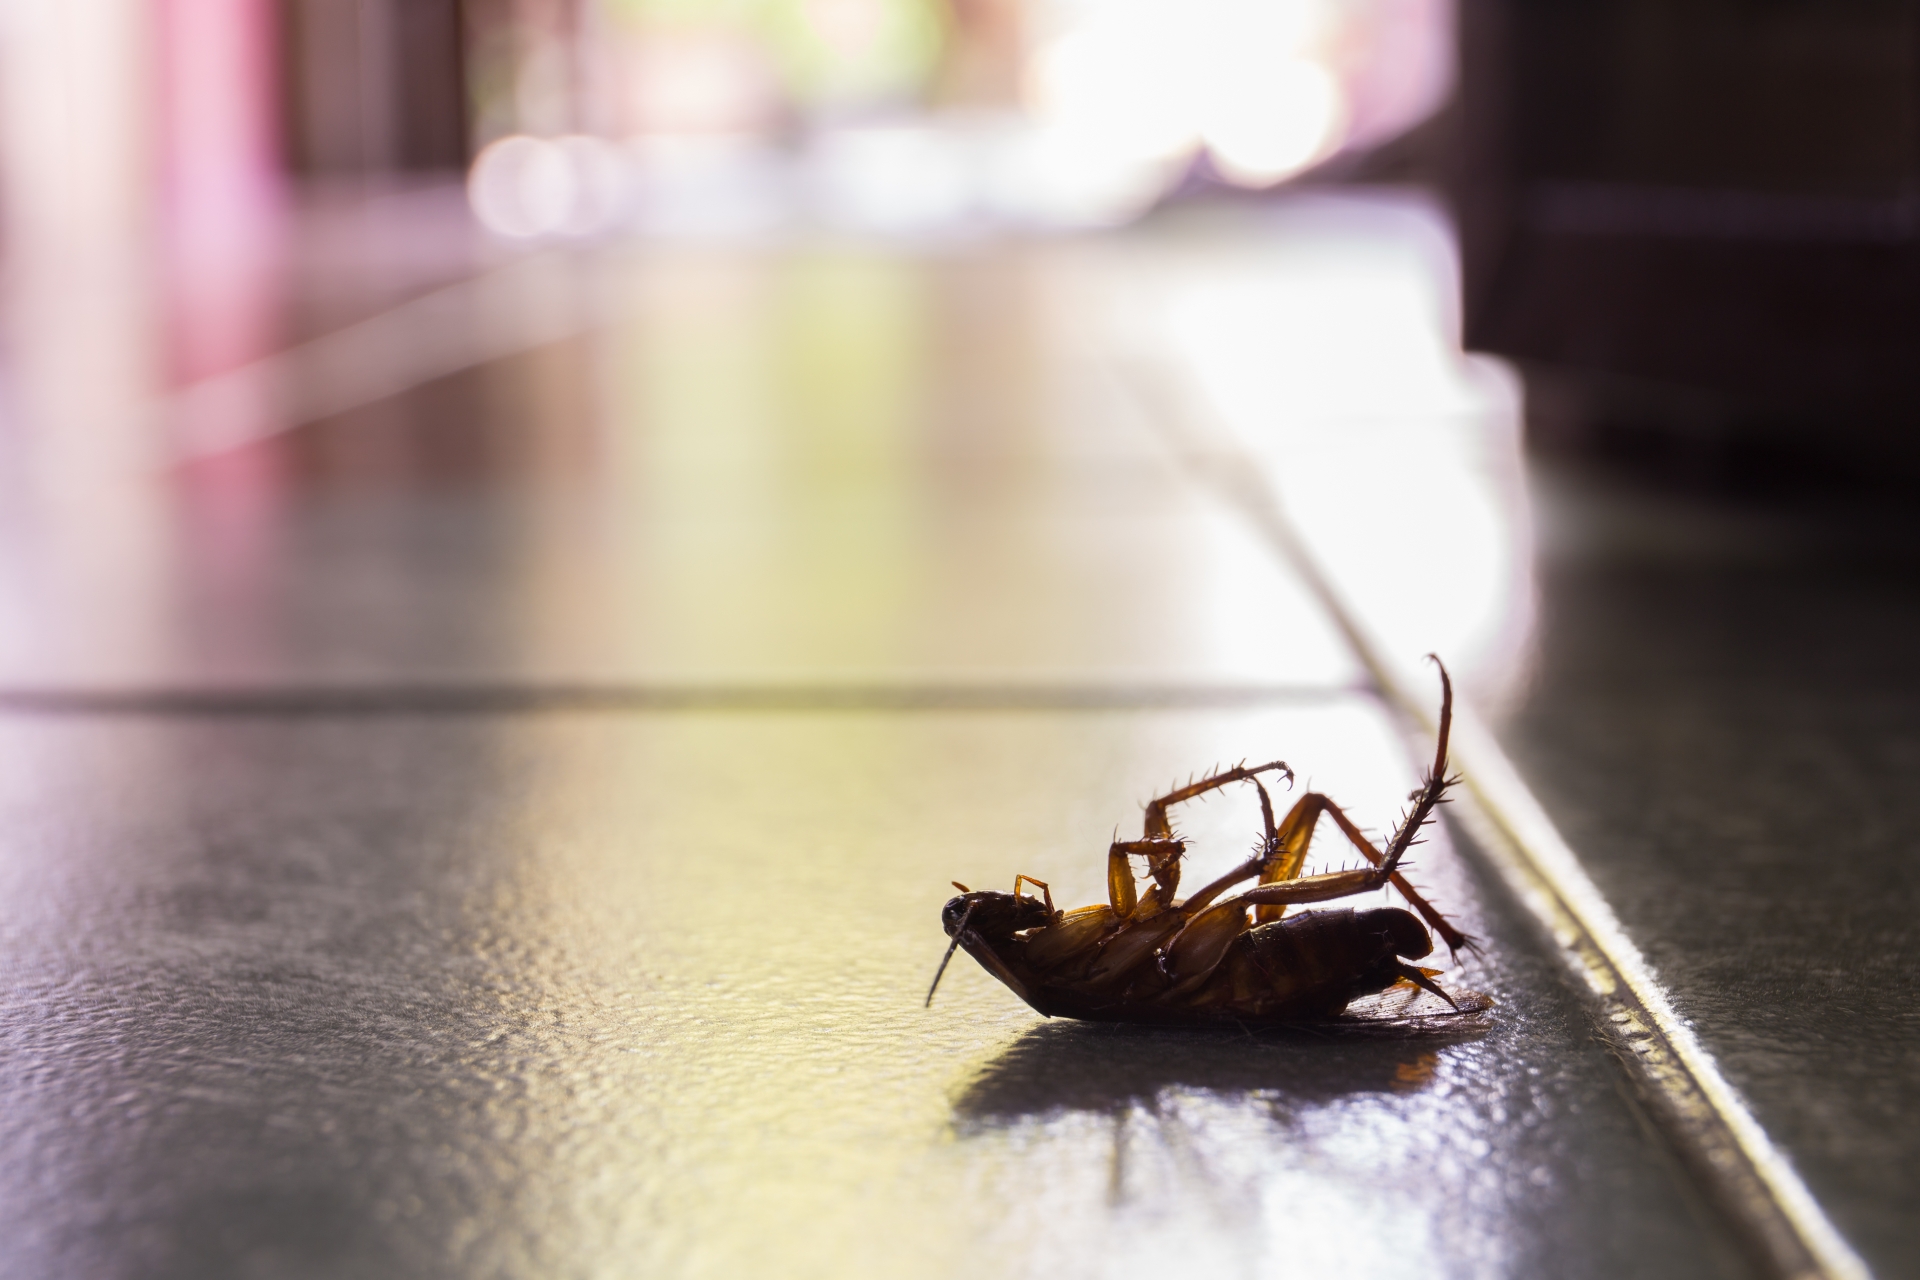 Cockroach Control, Pest Control in Lambeth, SE11. Call Now 020 8166 9746